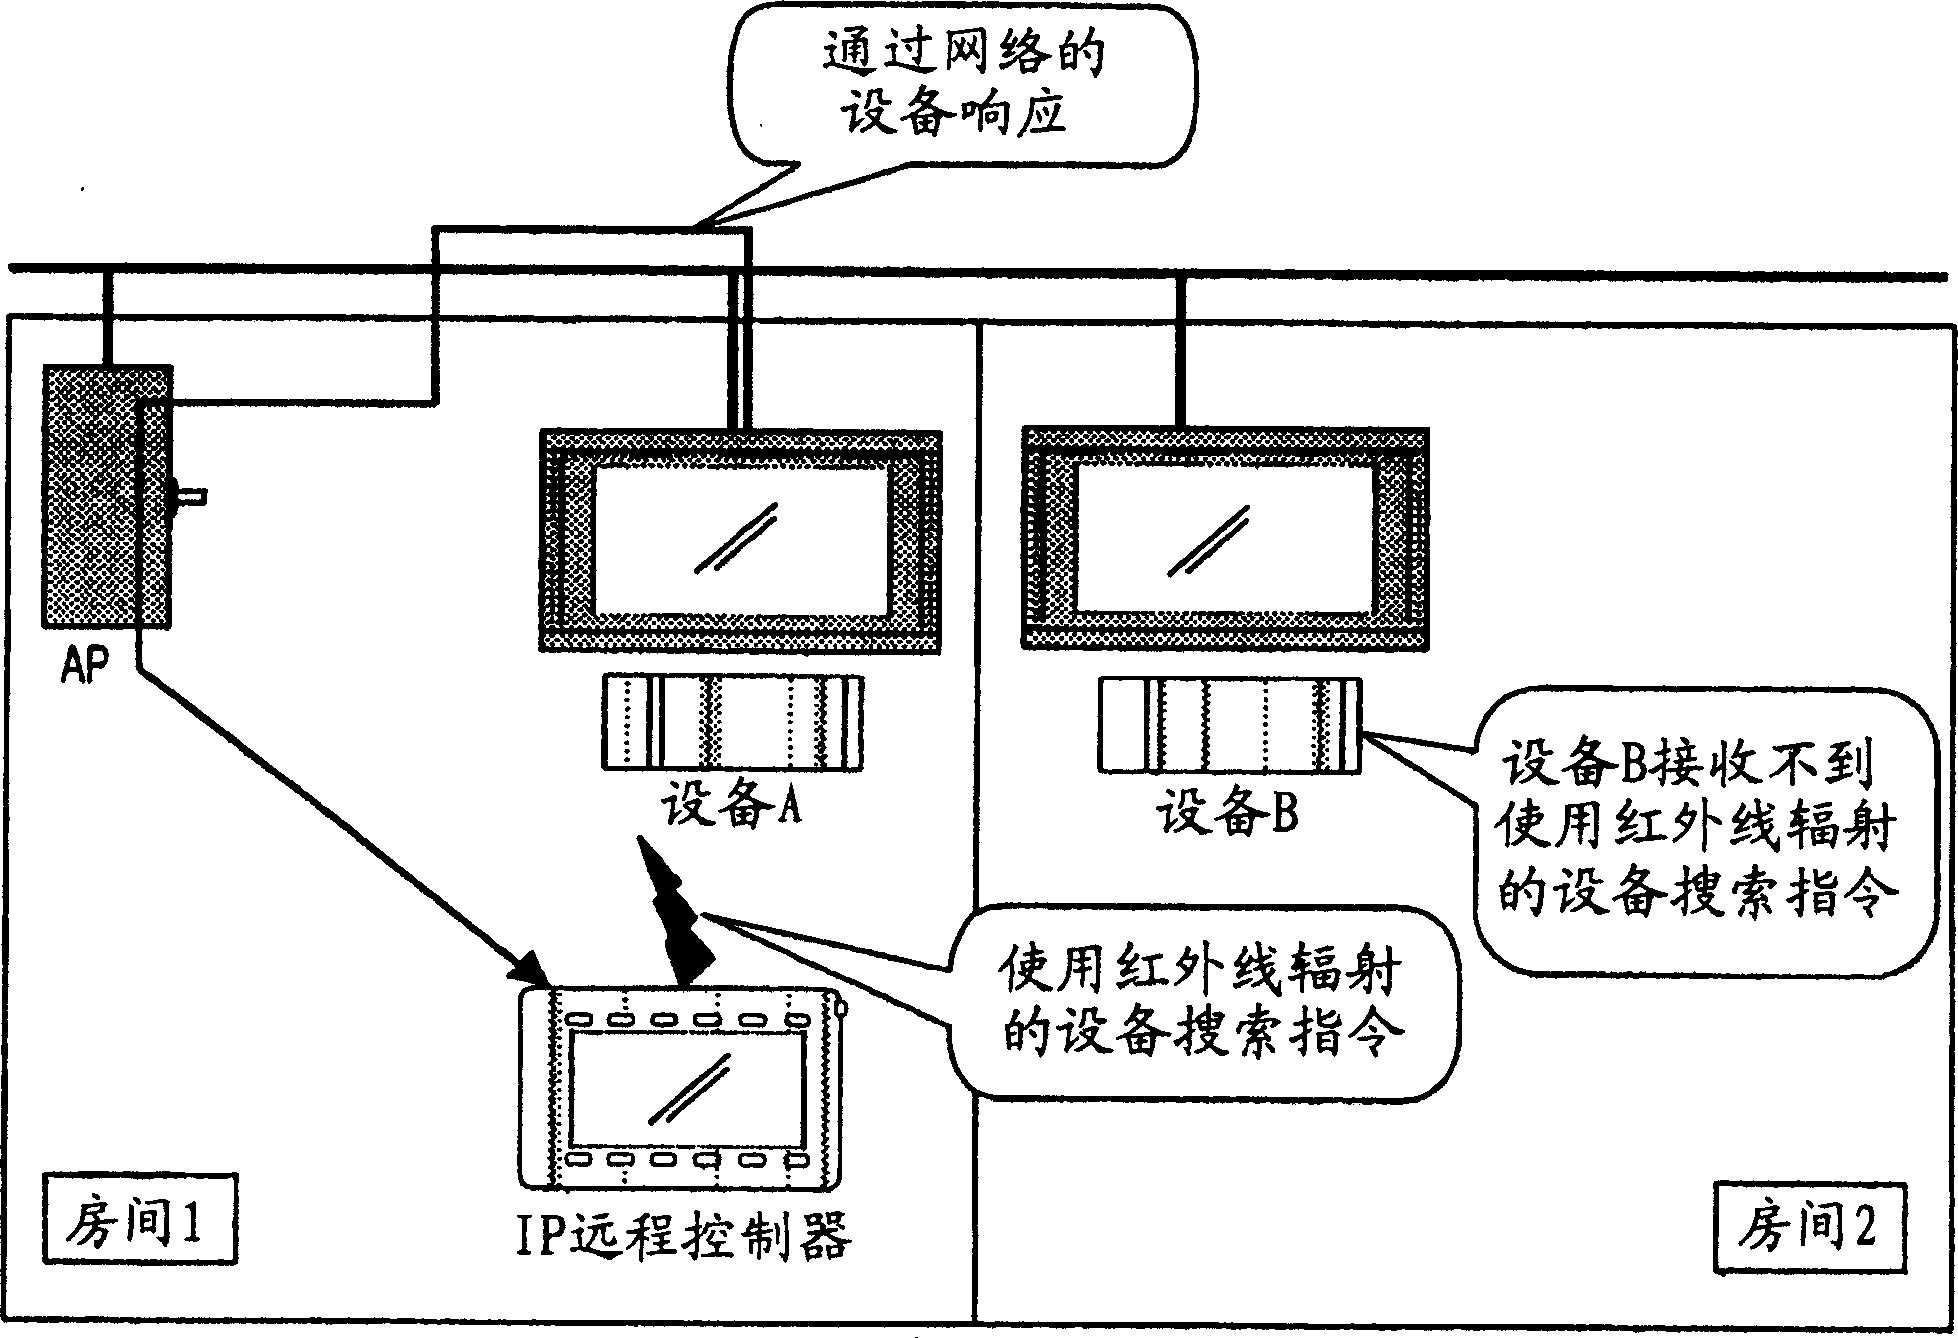 Remote control system, remote control method, remote controller and electronic device